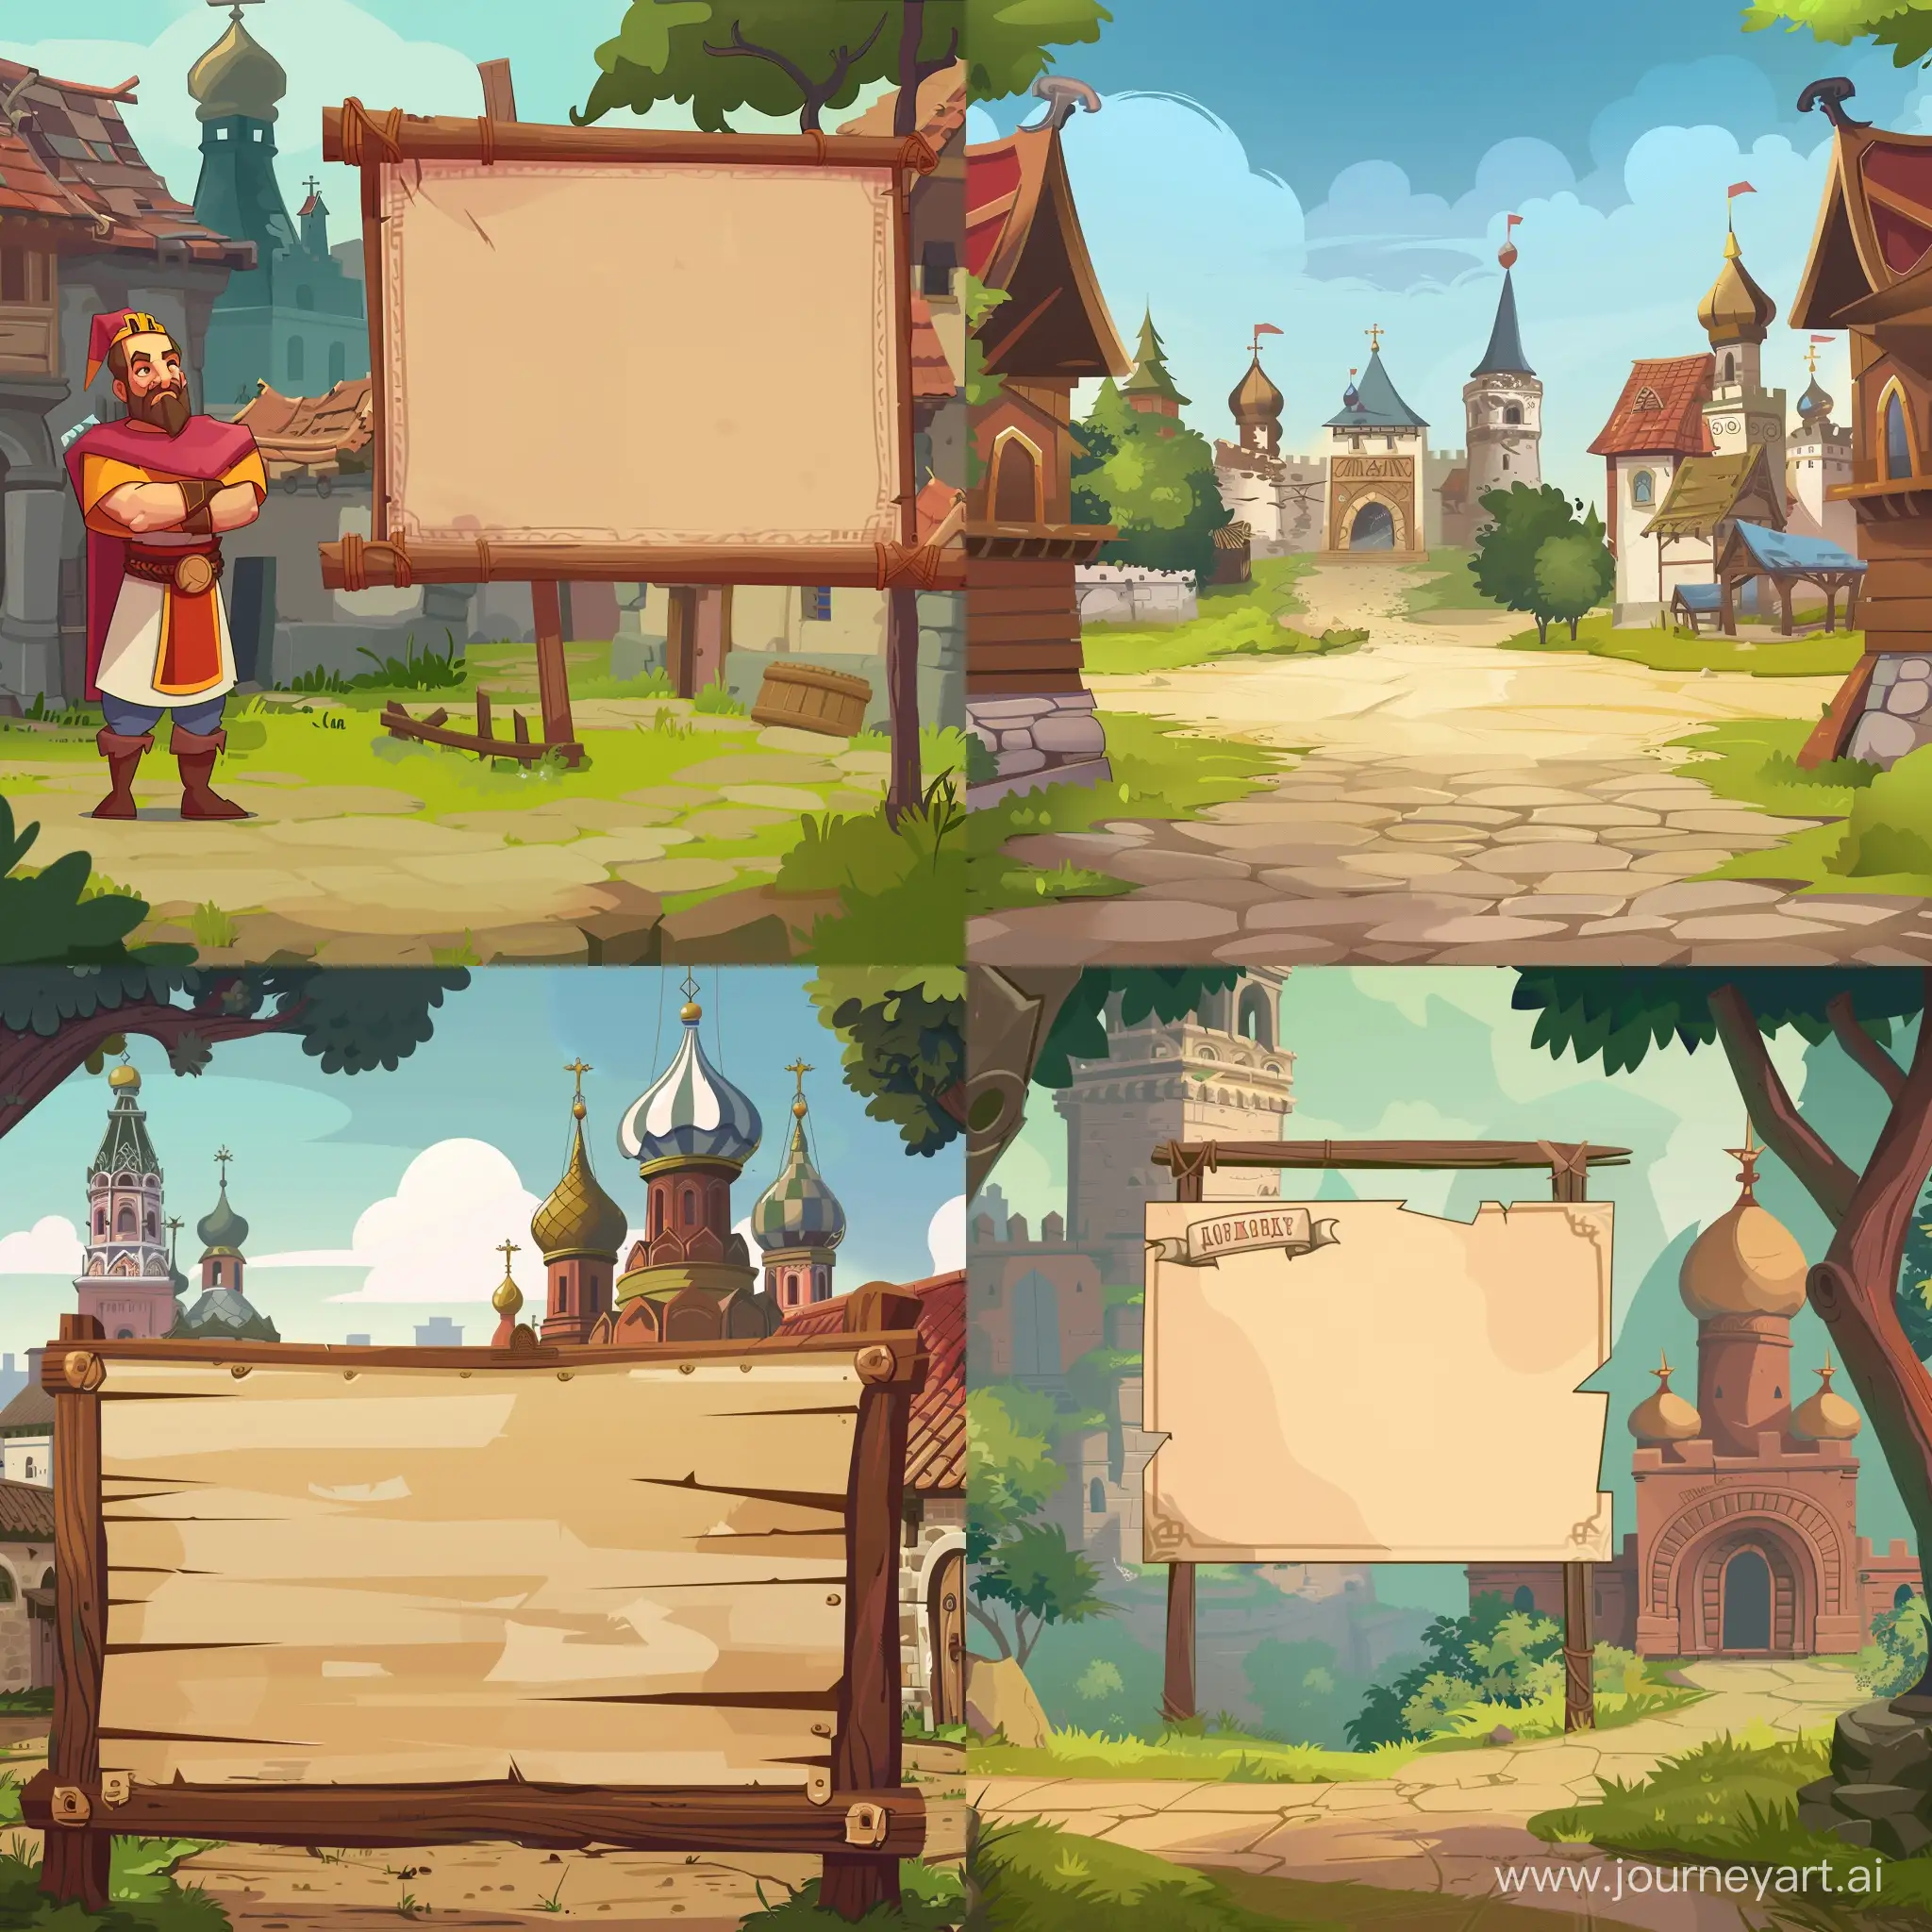 Empty-Dialog-Panel-Interface-for-an-Ancient-RussiaThemed-Game-in-Cartoon-Style